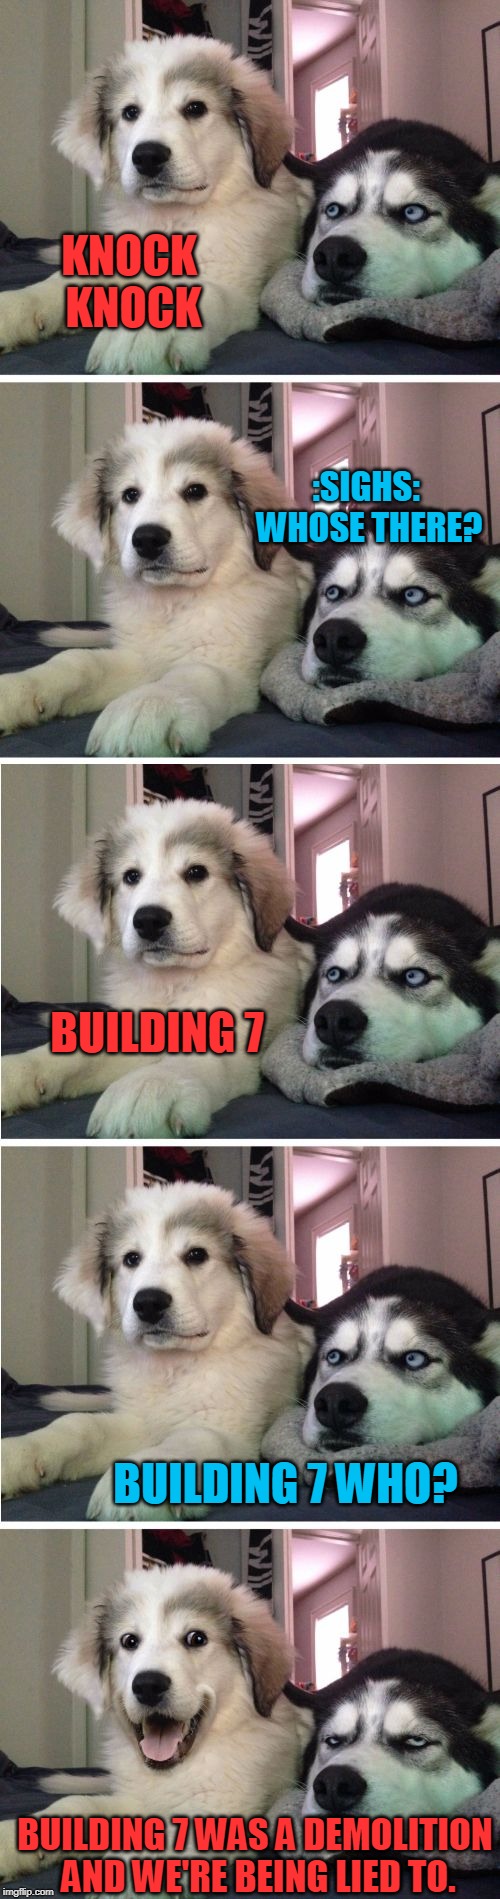 Knock Knock Dogs | KNOCK KNOCK; :SIGHS: WHOSE THERE? BUILDING 7; BUILDING 7 WHO? BUILDING 7 WAS A DEMOLITION AND WE'RE BEING LIED TO. | image tagged in knock knock dogs,911,building 7,twin towers,false flag,memes | made w/ Imgflip meme maker